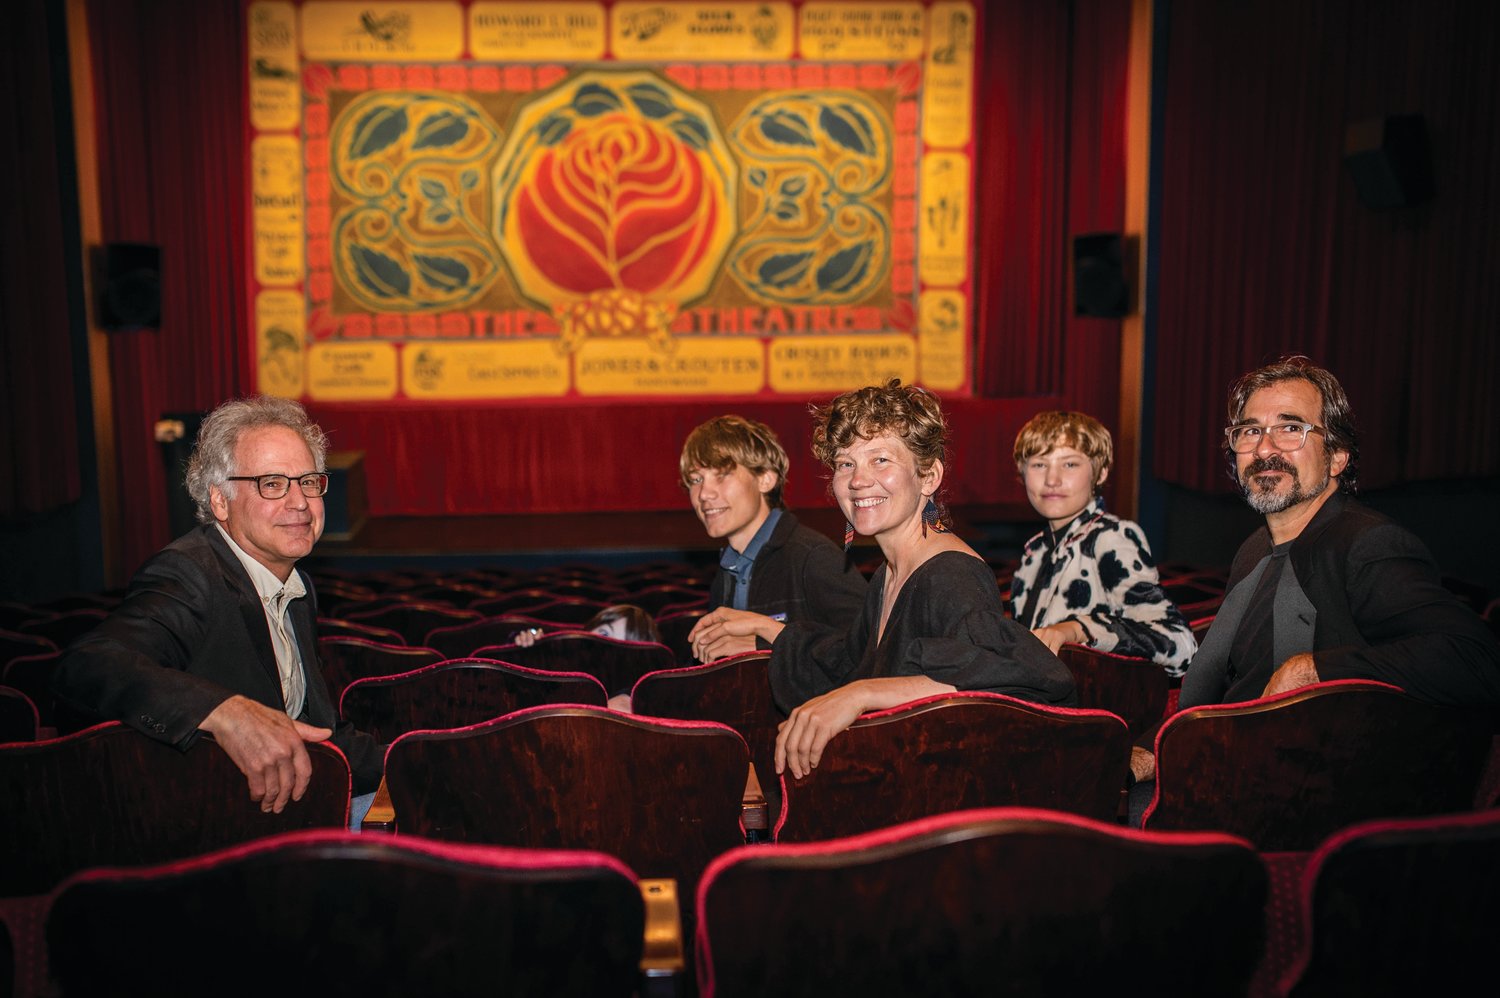 Rocky Friedman, at left, sat down with the family of new owners including Emile D’Alessandro, the youngest child peeking out from the seat, Henri Huber, George Marie, Sophia Huber, and Michael D’Alessandro.